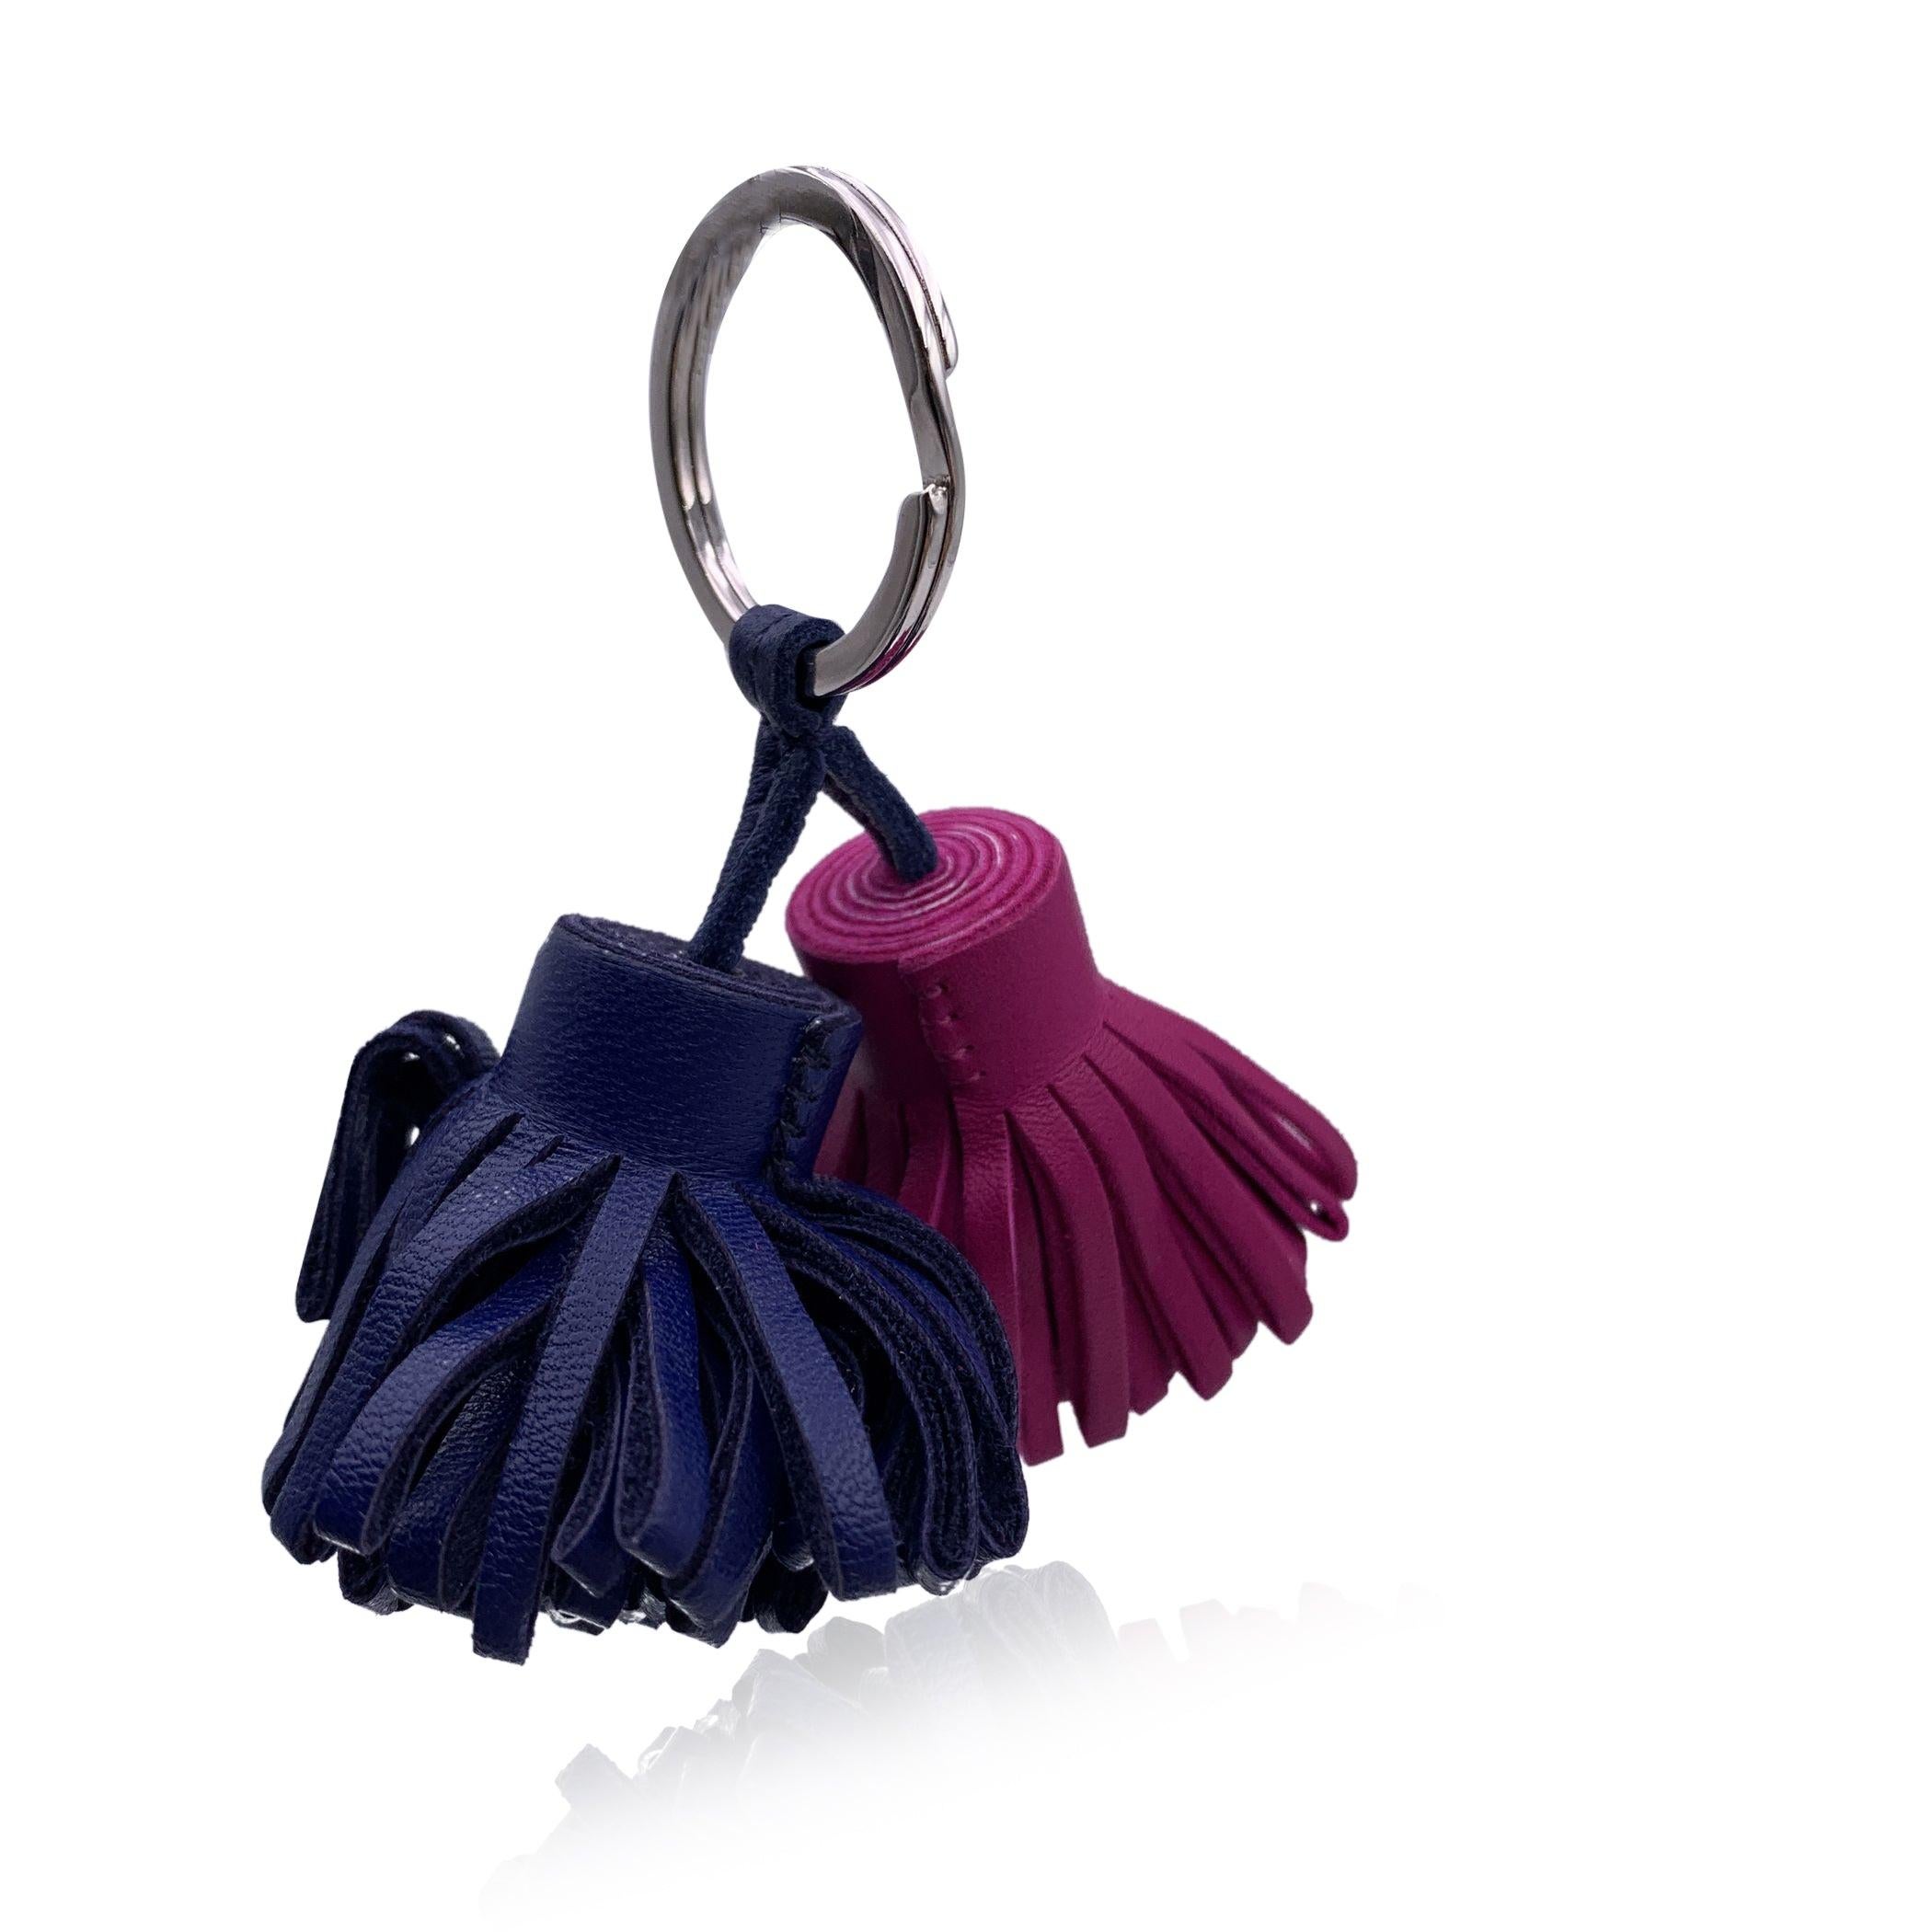 Hermès 'Carmen Uno-Dos' key ring. 2 small tassels crafted in electric bue and pink purple Milo Lambskin leather. Palladium plated hardware. 'HERMES Paris' engraved on the ring and on leather tassel. Retail price is about 350 euros Condition A -